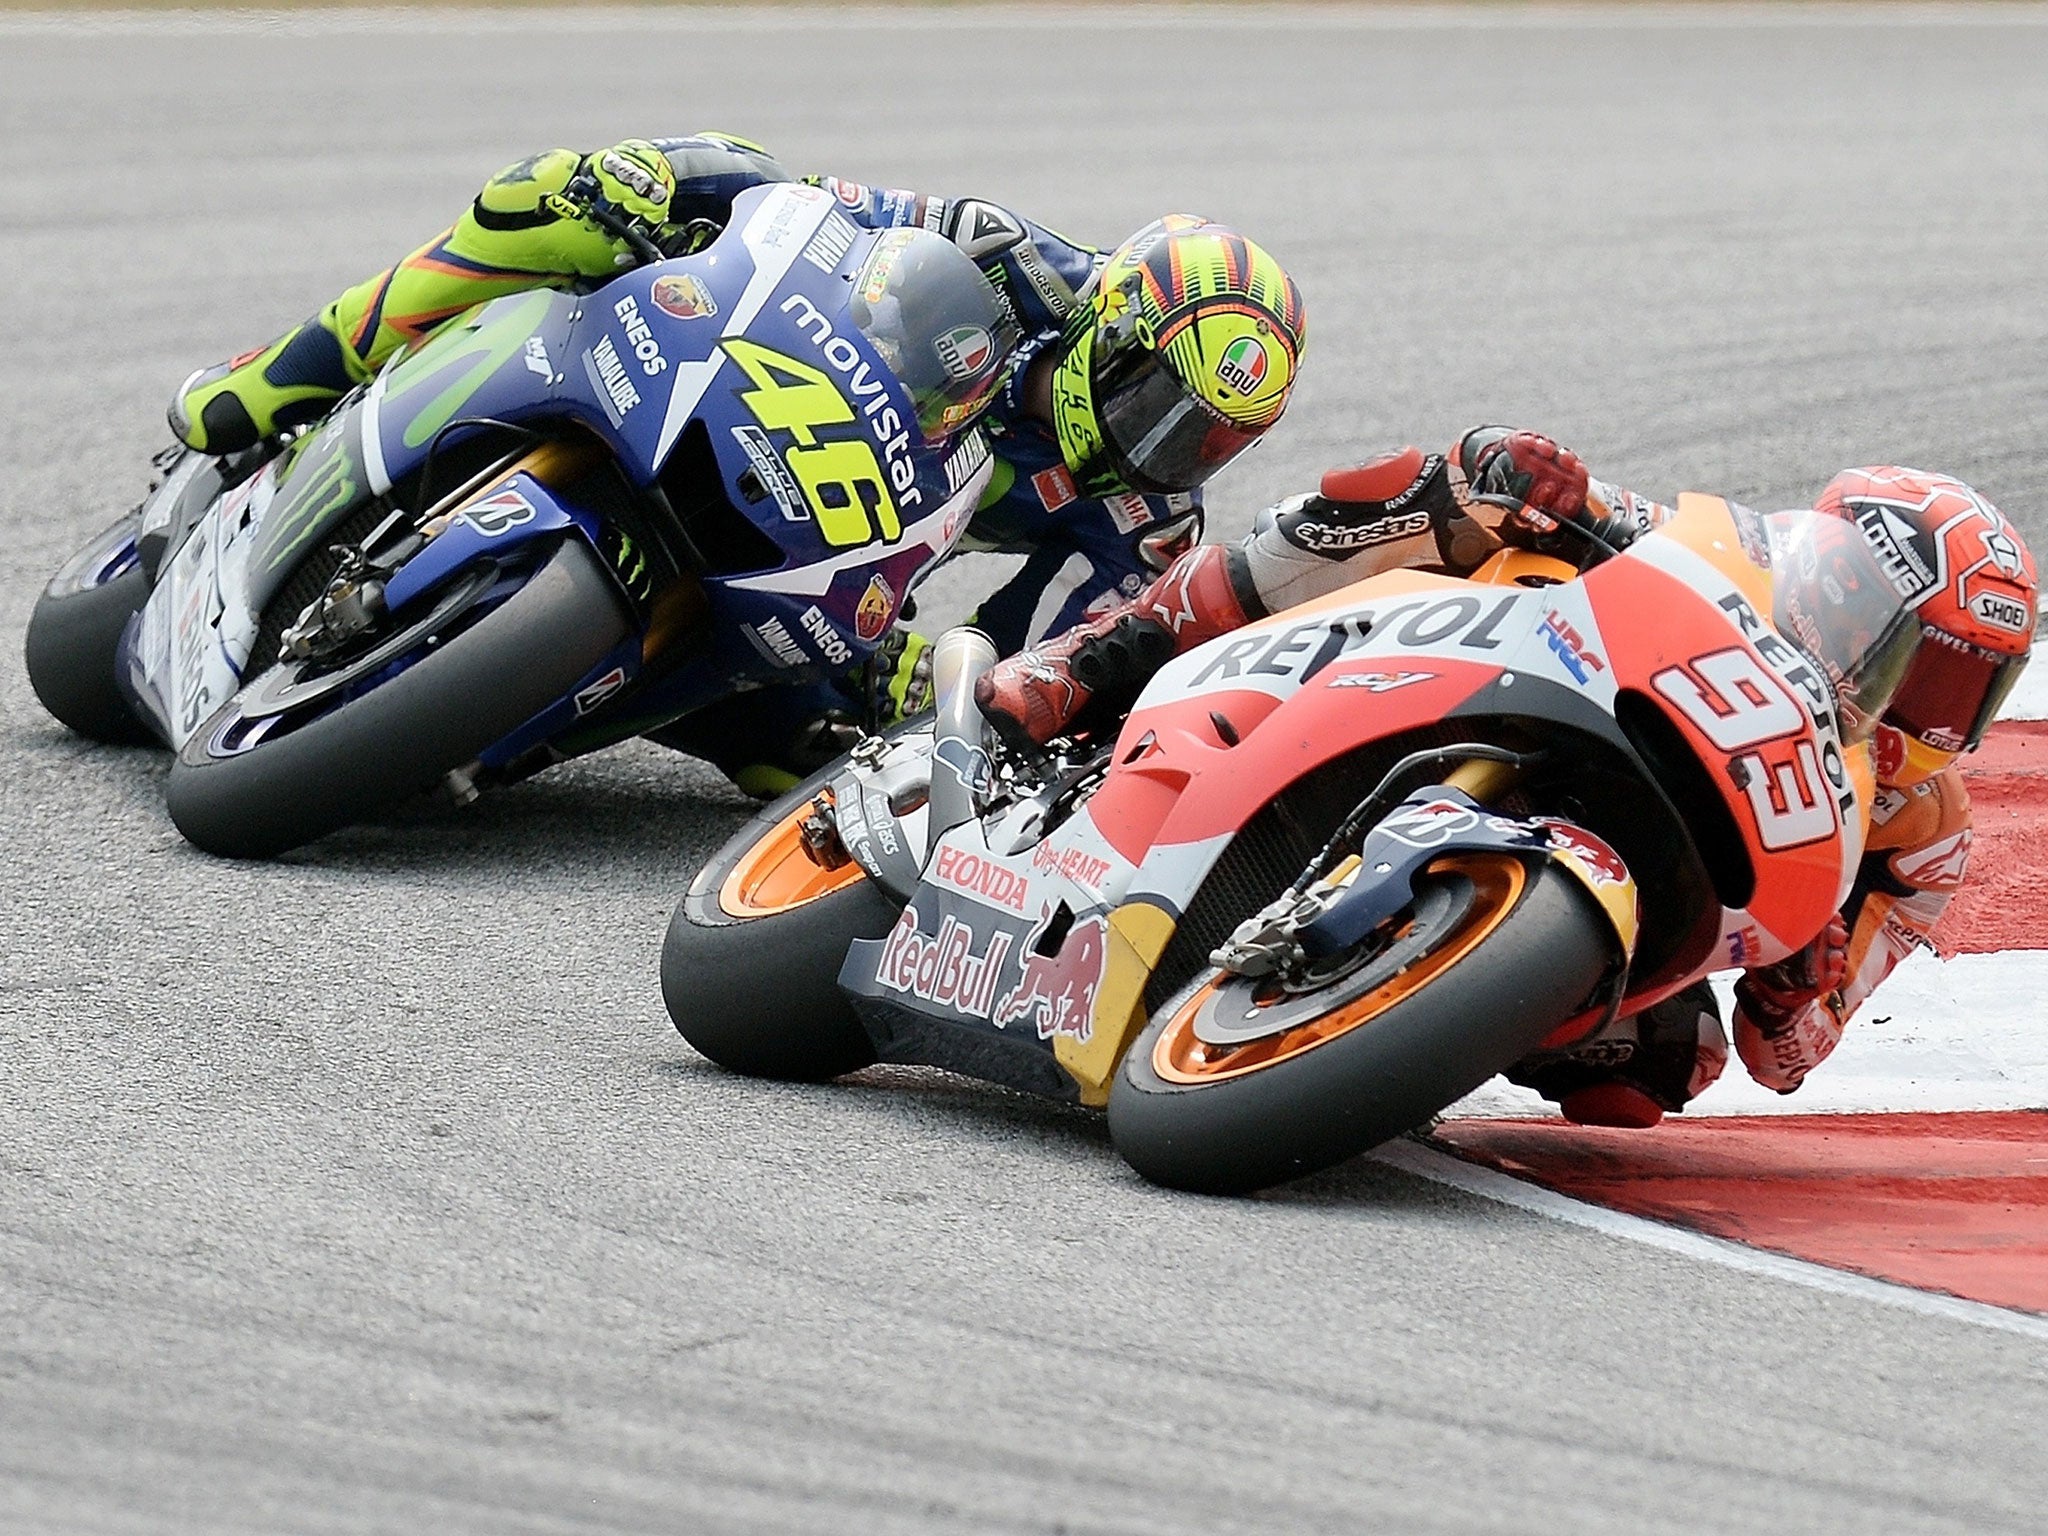 Valentino Rossi and Marc Marquez sollided on lap 7